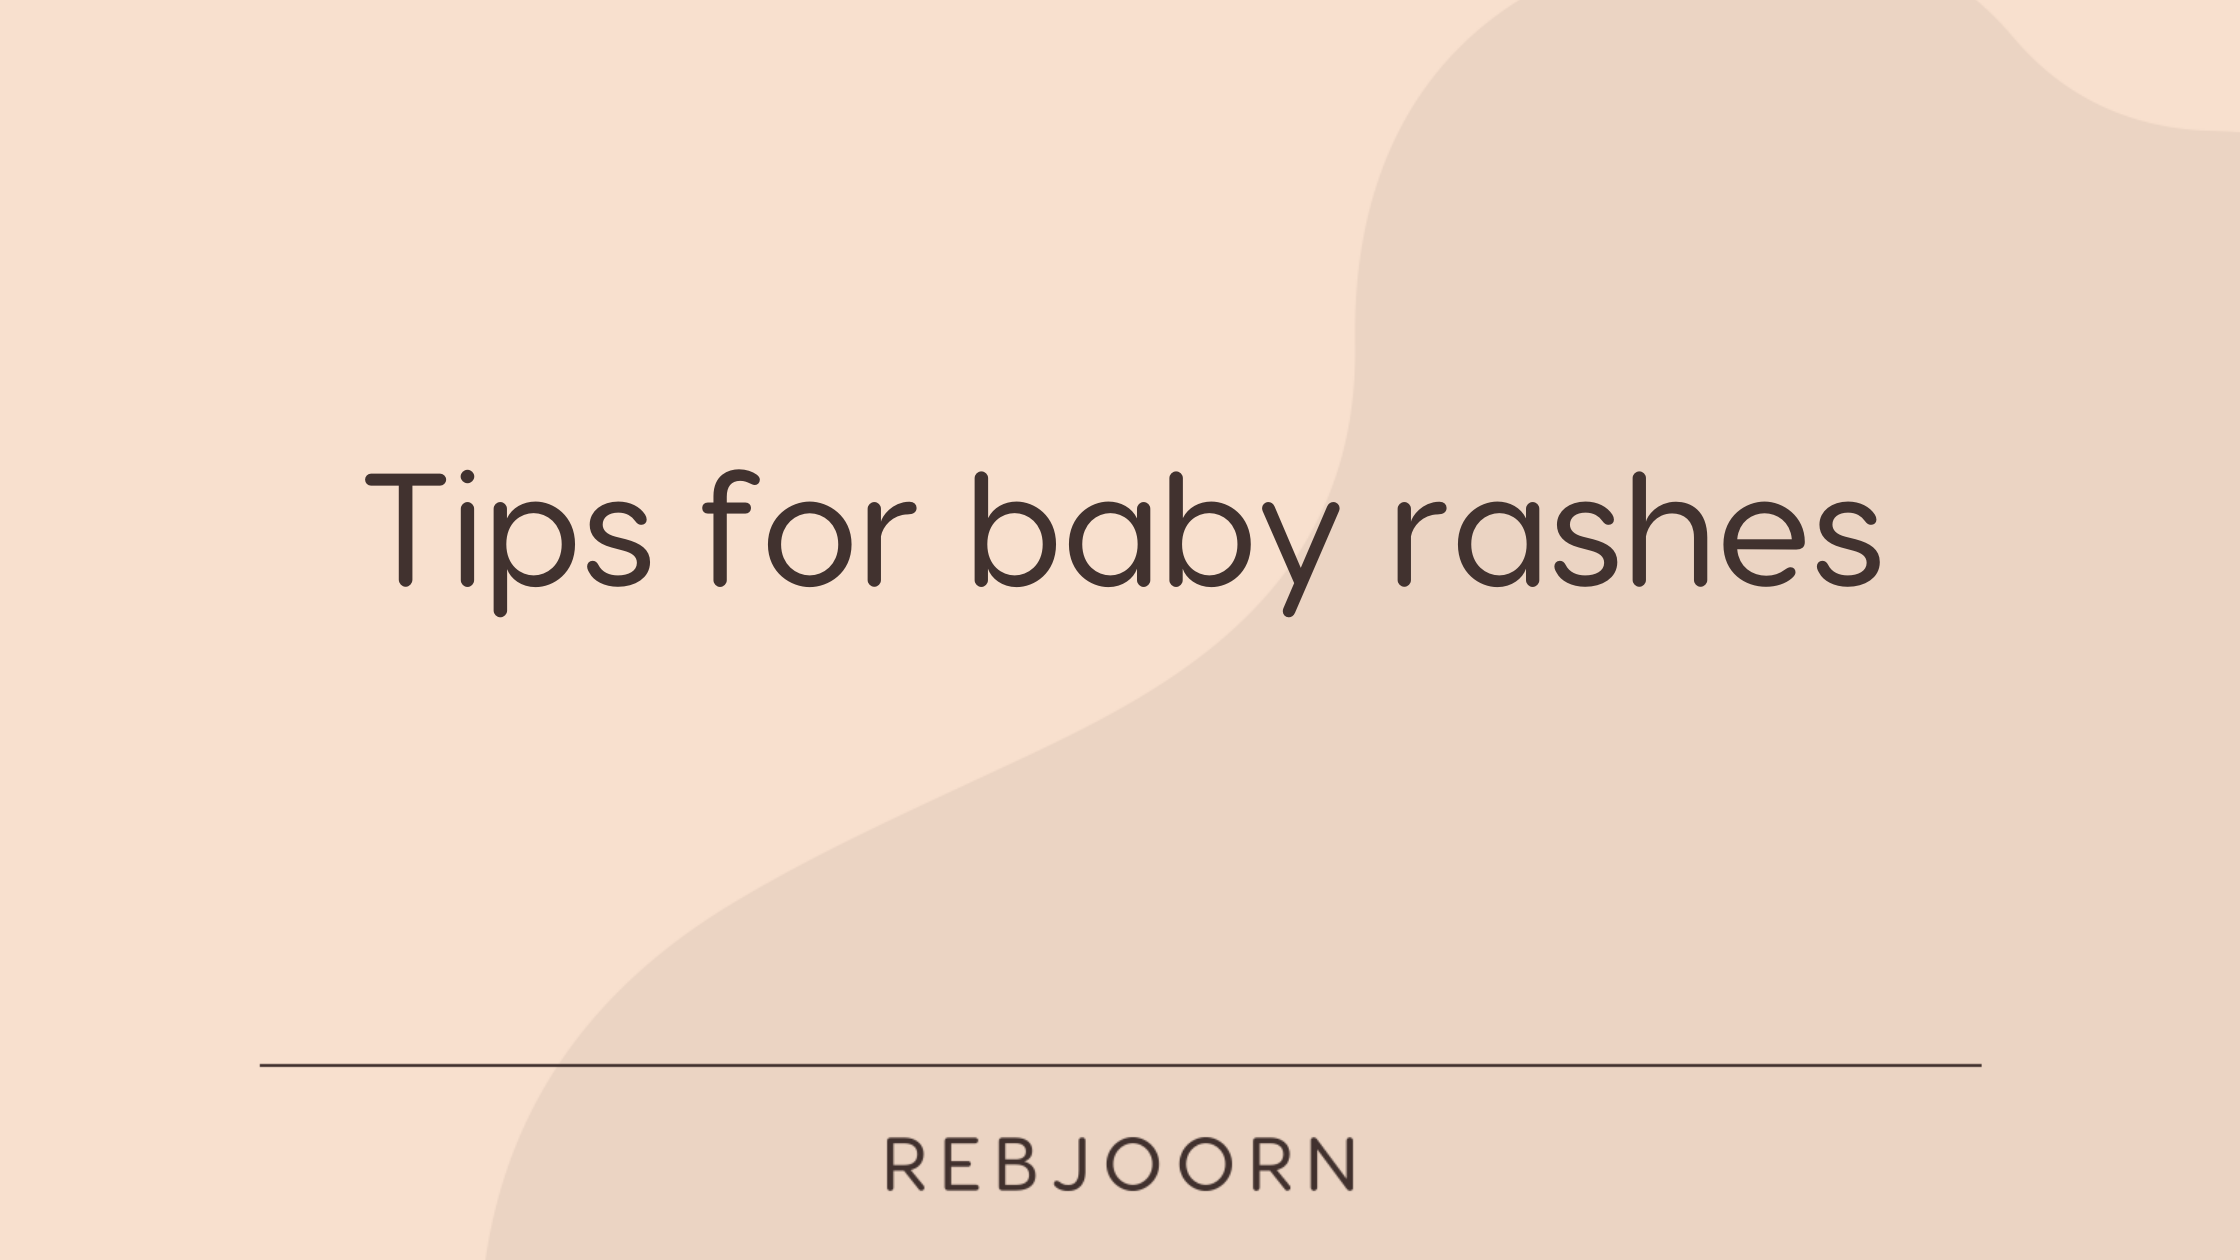 Tips for baby rashes